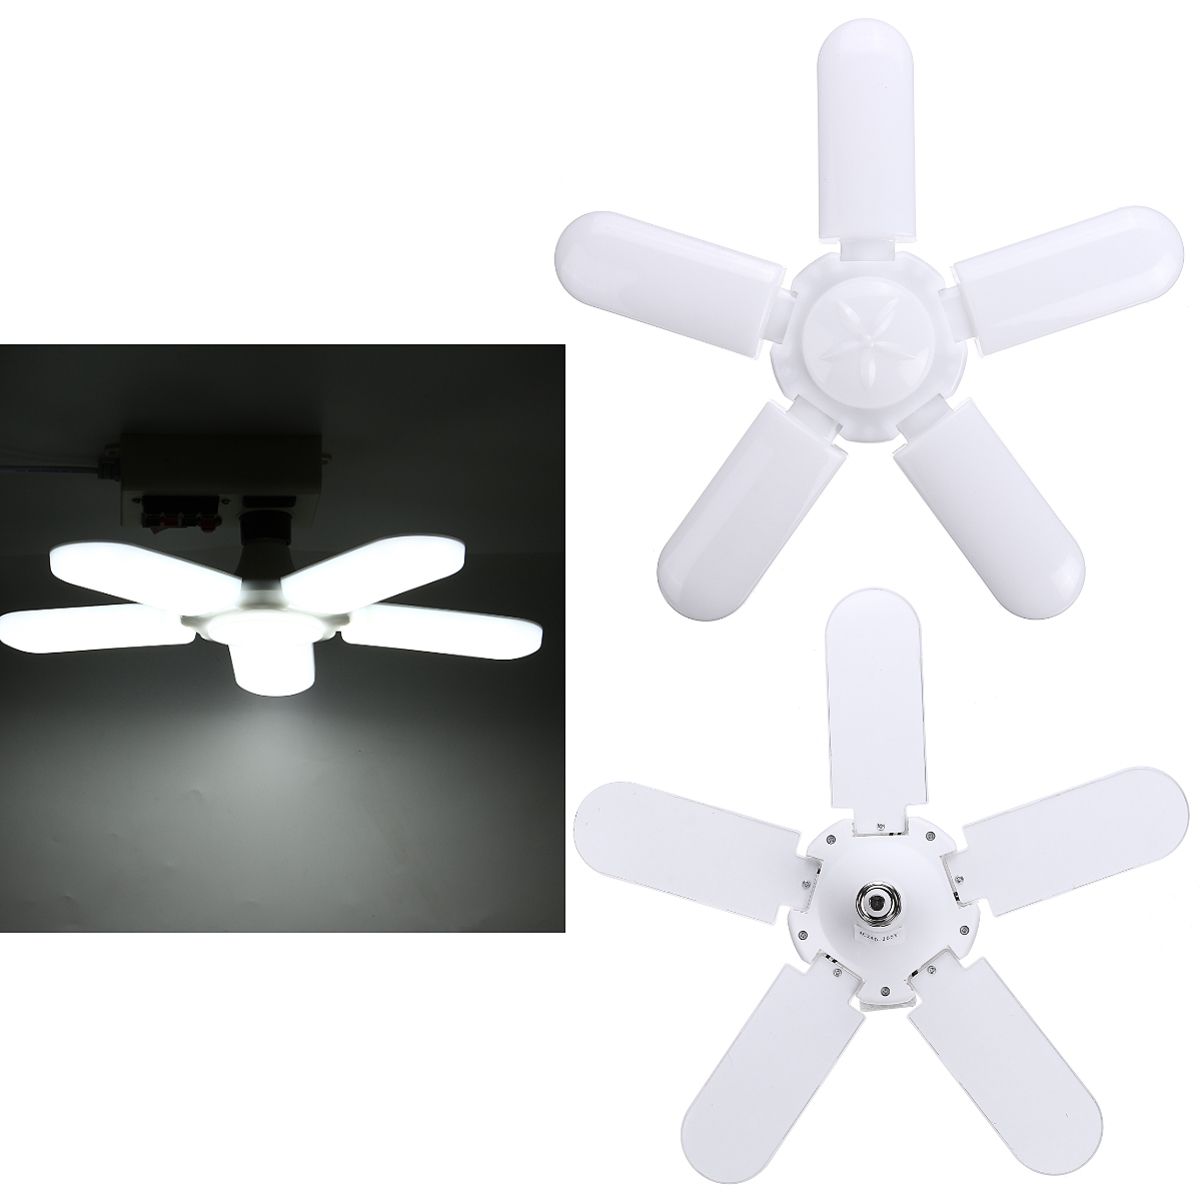 75W-E27-2500LM-Deformable-LED-Ceiling-Lamp-Light-Fixture-Foldable-Home-Garage-1710184